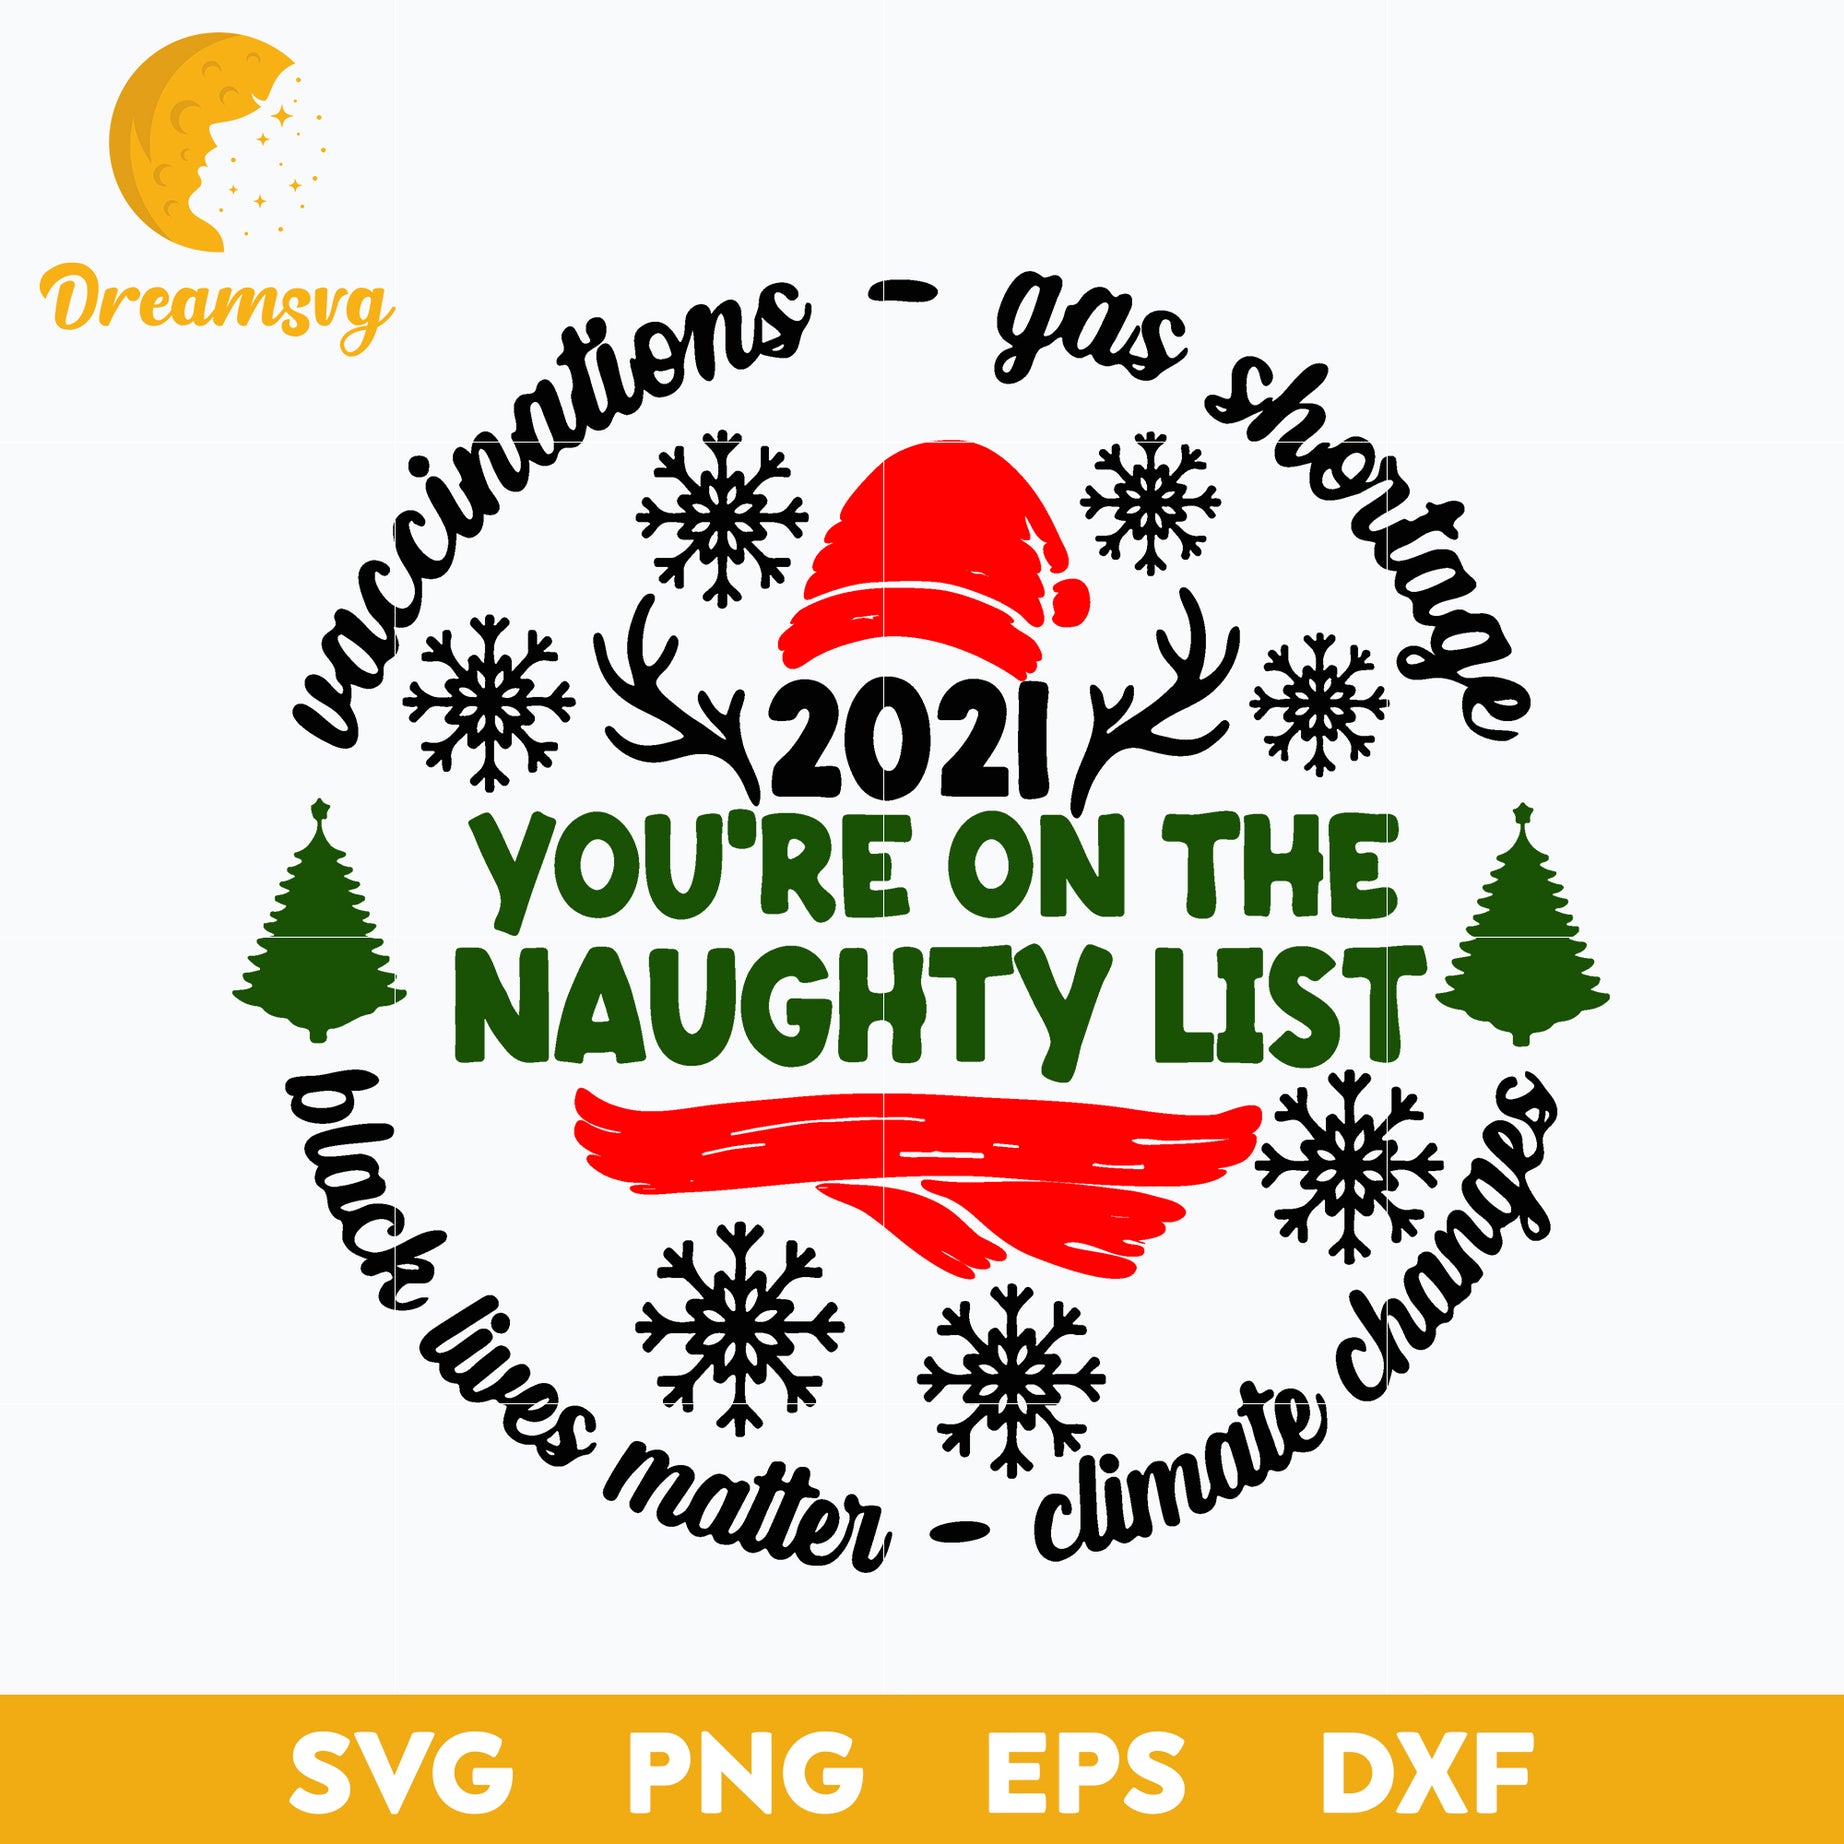 2021 You're On The Naughty List Svg, Funny Svg, png, dxf, eps digital file.